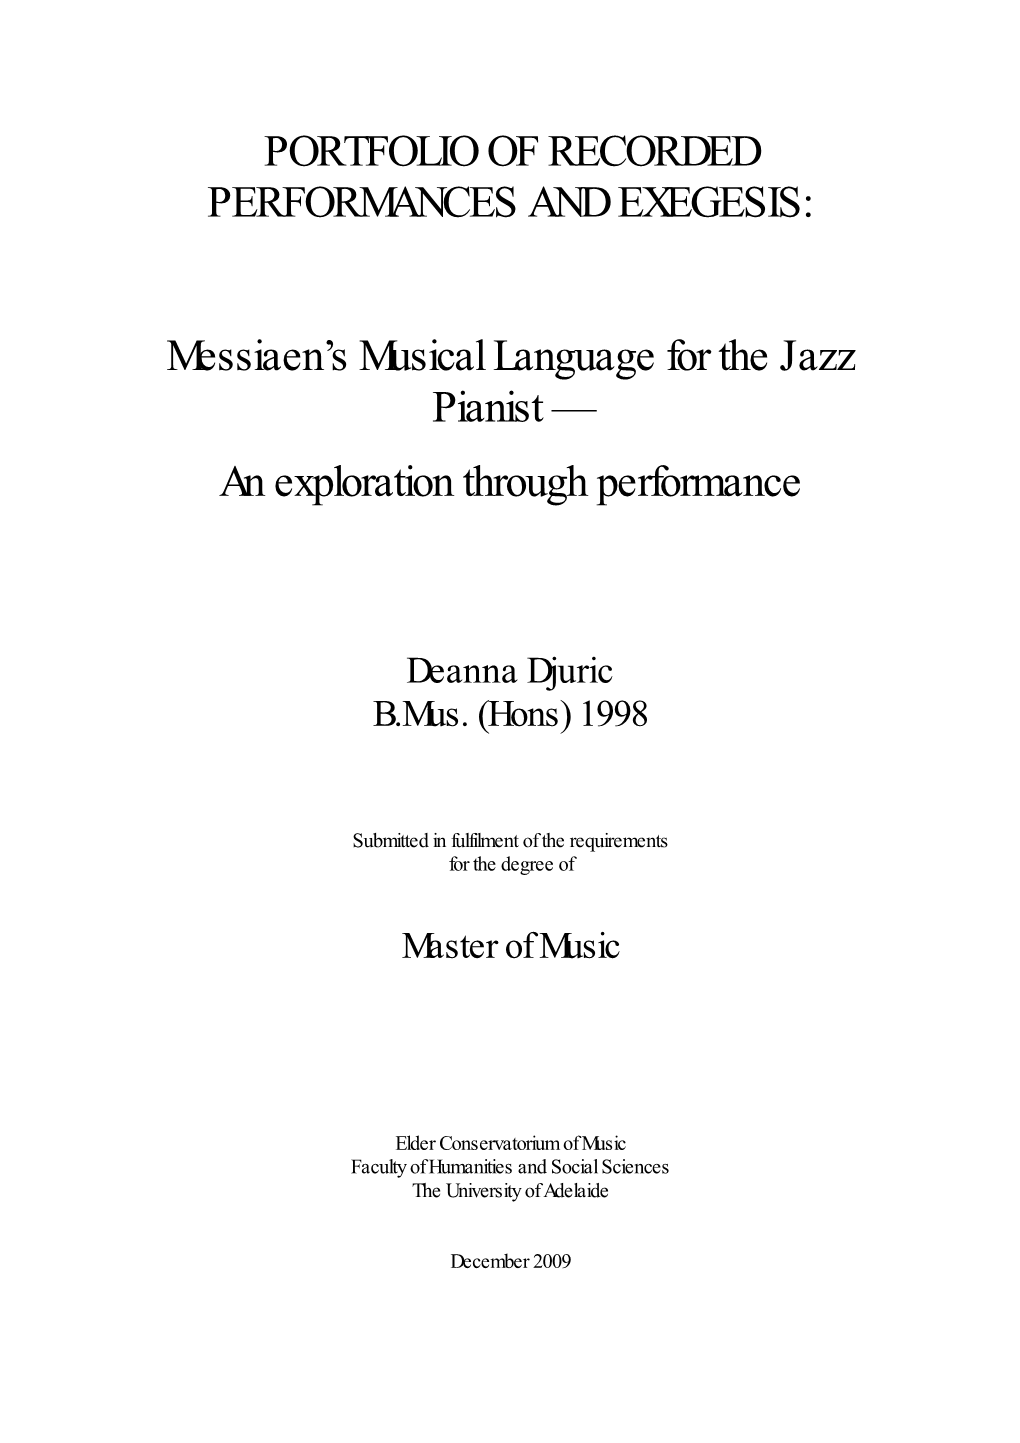 Messiaen's Musical Language for the Jazz Pianist